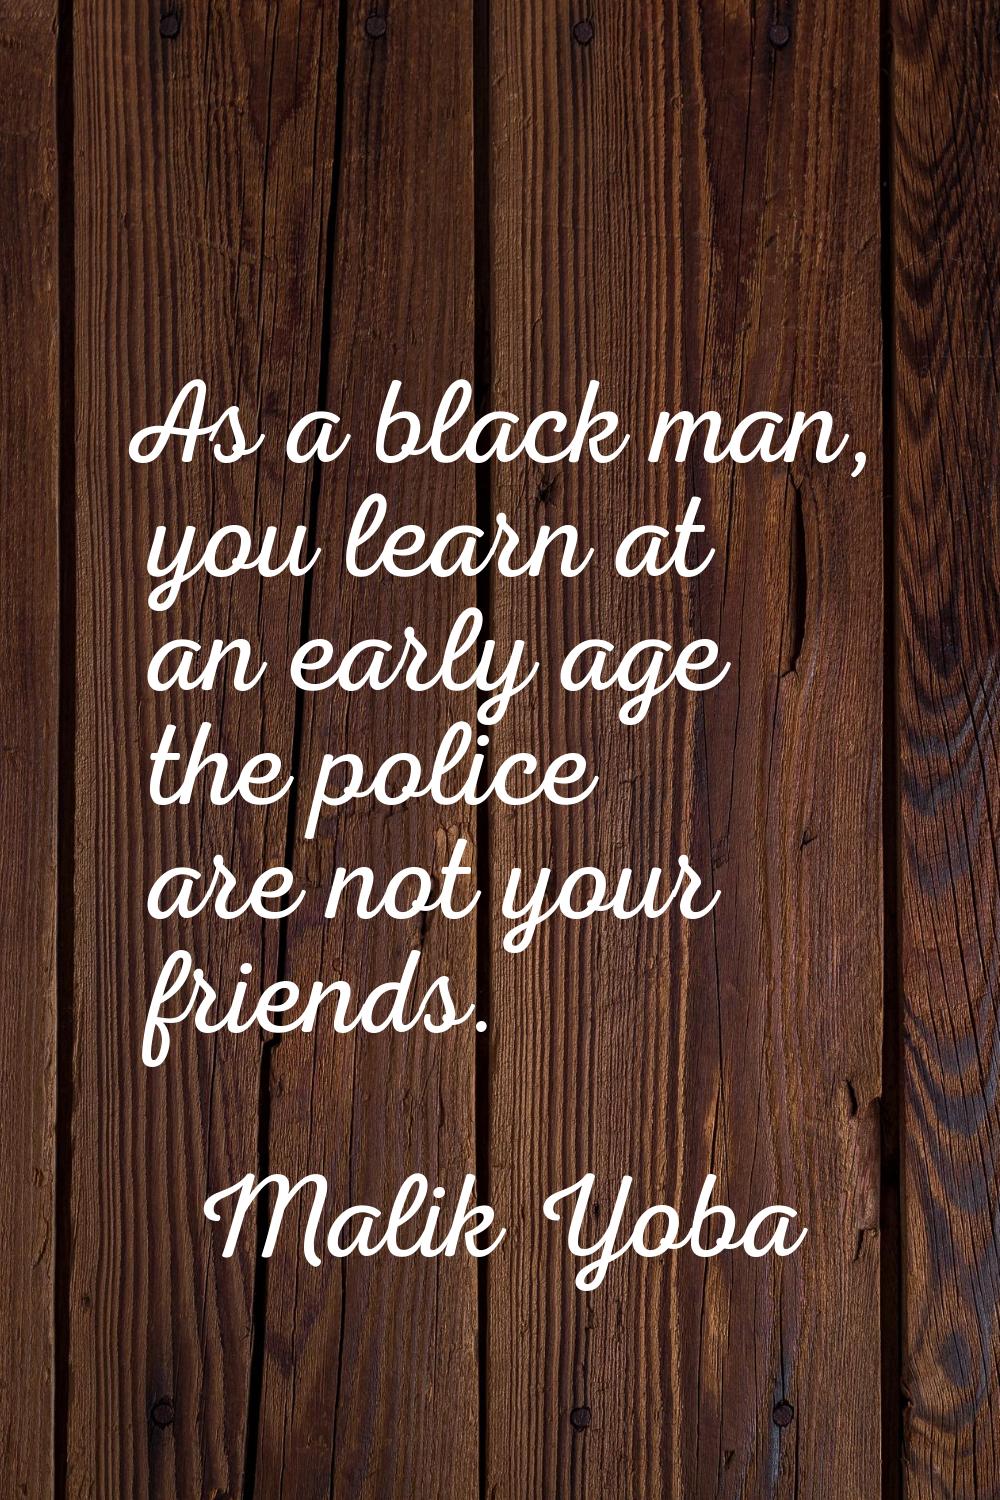 As a black man, you learn at an early age the police are not your friends.